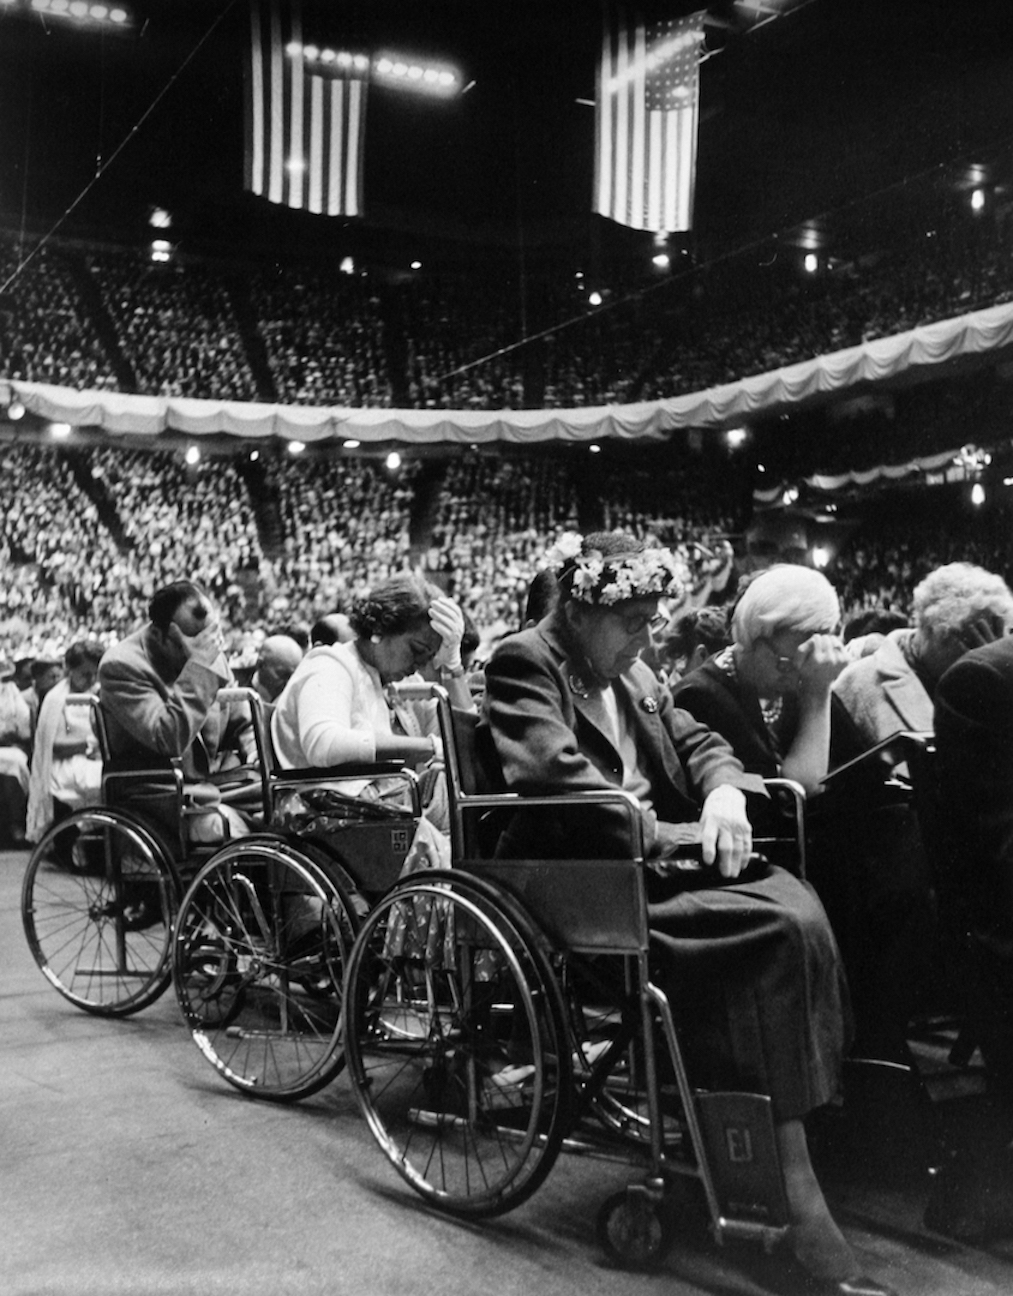 Paulin photo titled “Billy Graham Rally, Madison Square Garden” taken in 1956.